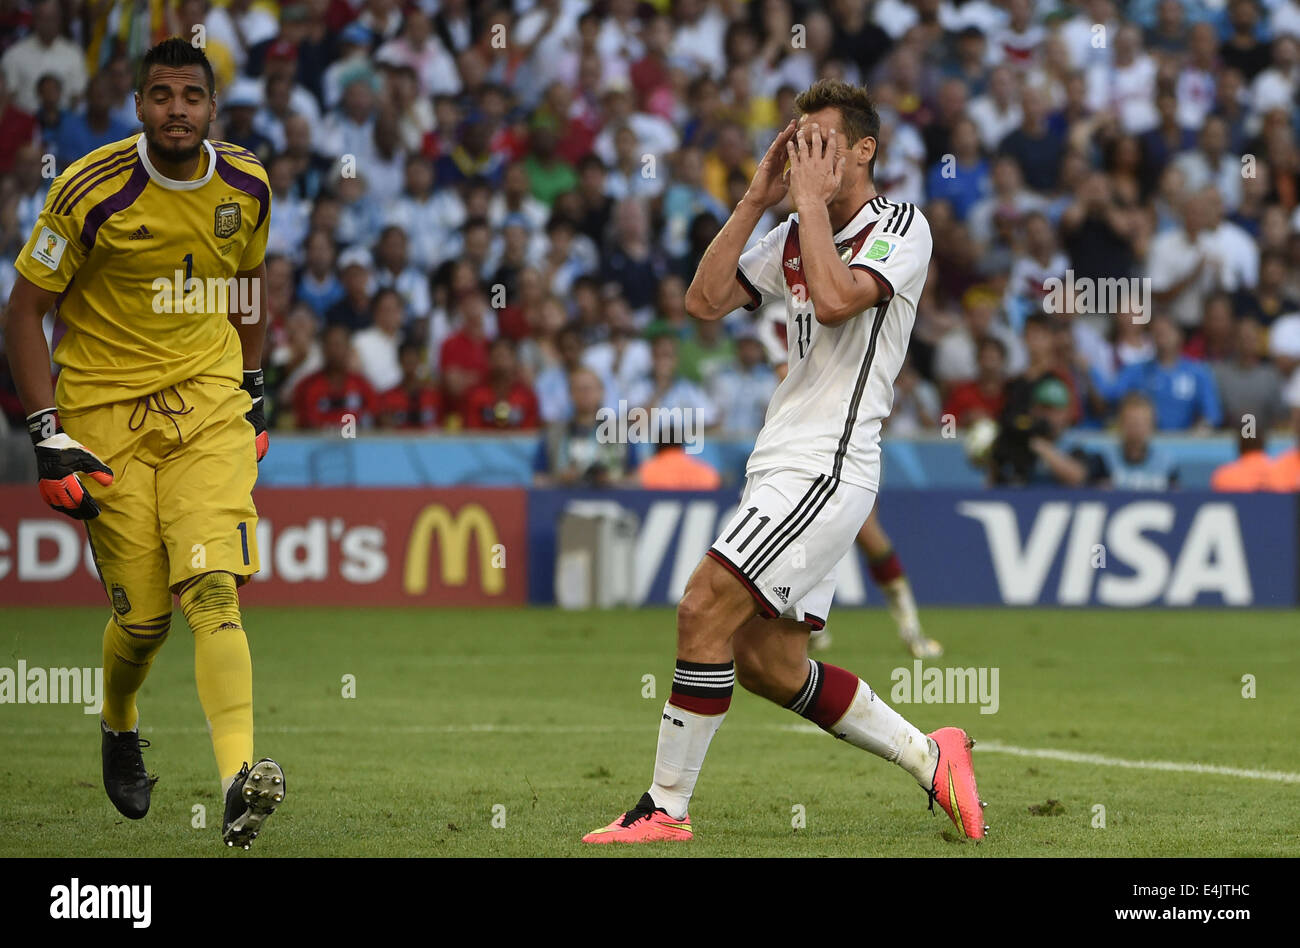 Rio De Janeiro, Brazil. 13th July, 2014. Germany's Miroslav Klose (R) reacts during the final match between Germany and Argentina of 2014 FIFA World Cup at the Estadio do Maracana Stadium in Rio de Janeiro, Brazil, on July 13, 2014. Credit:  Yang Lei/Xinhua/Alamy Live News Stock Photo